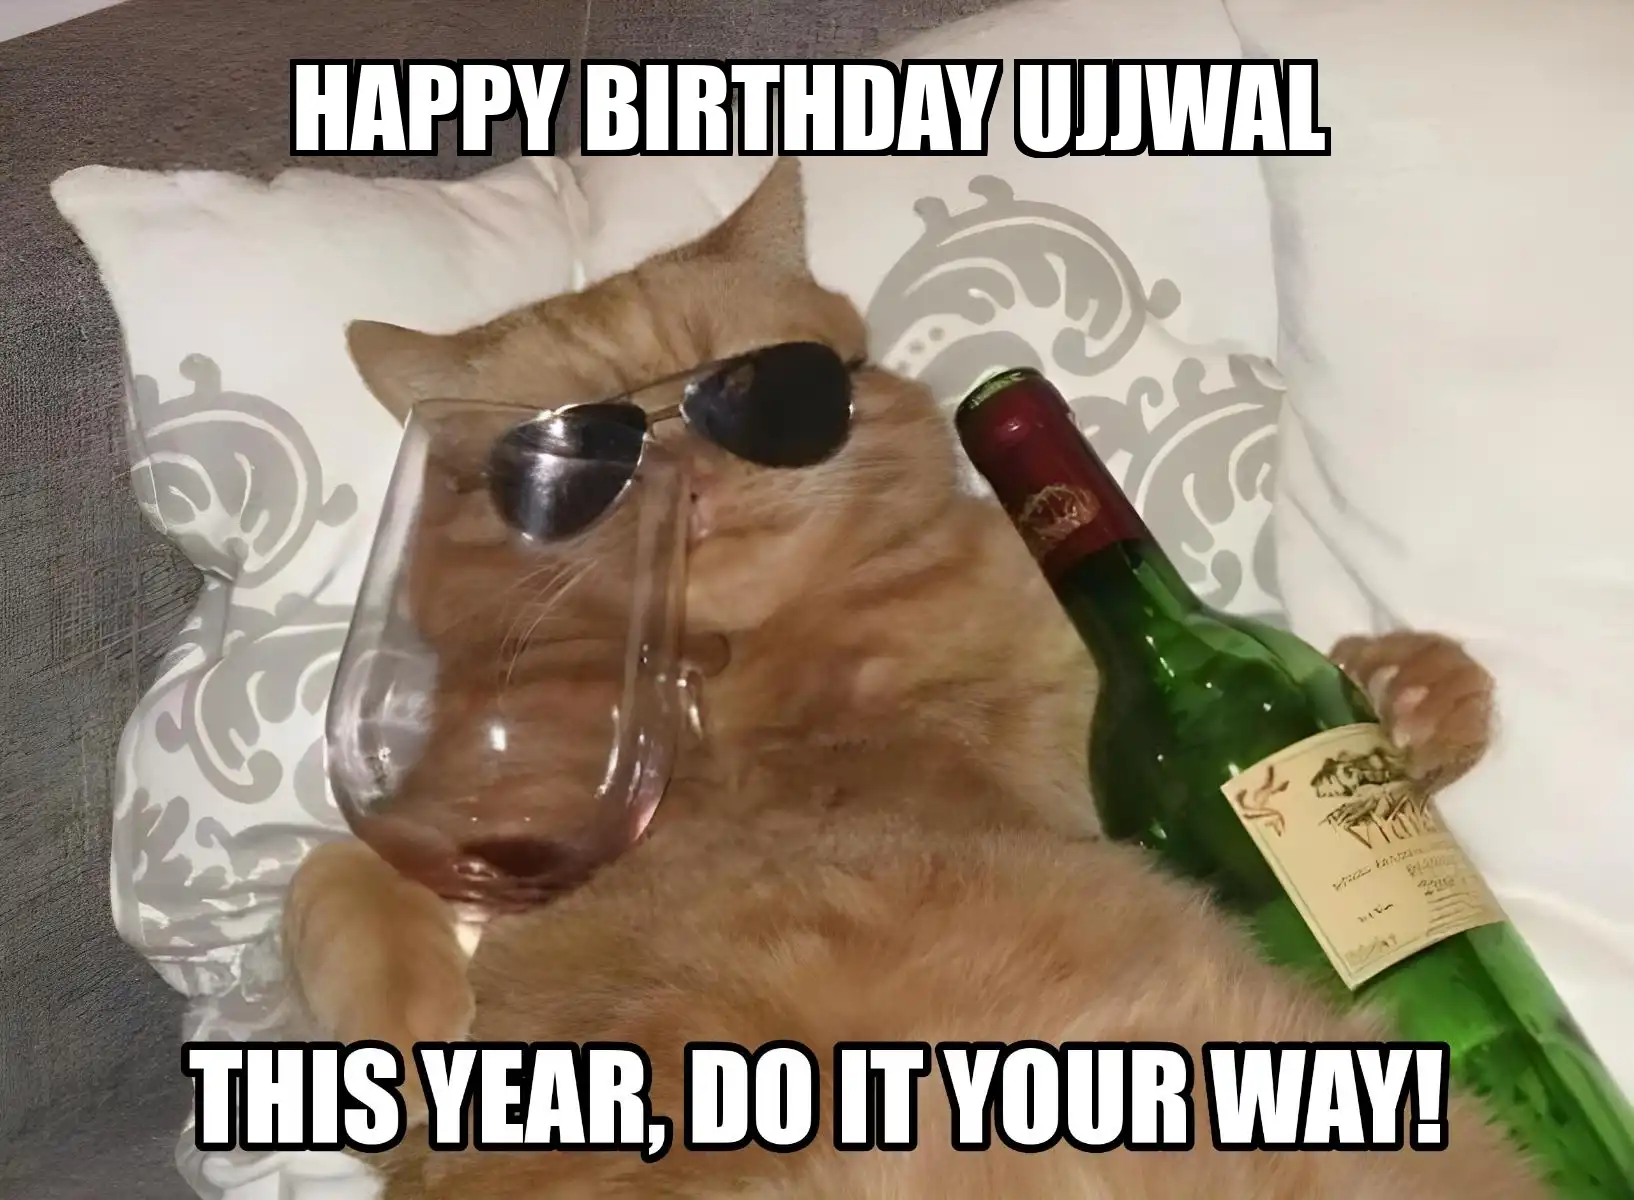 Happy Birthday Ujjwal This Year Do It Your Way Meme